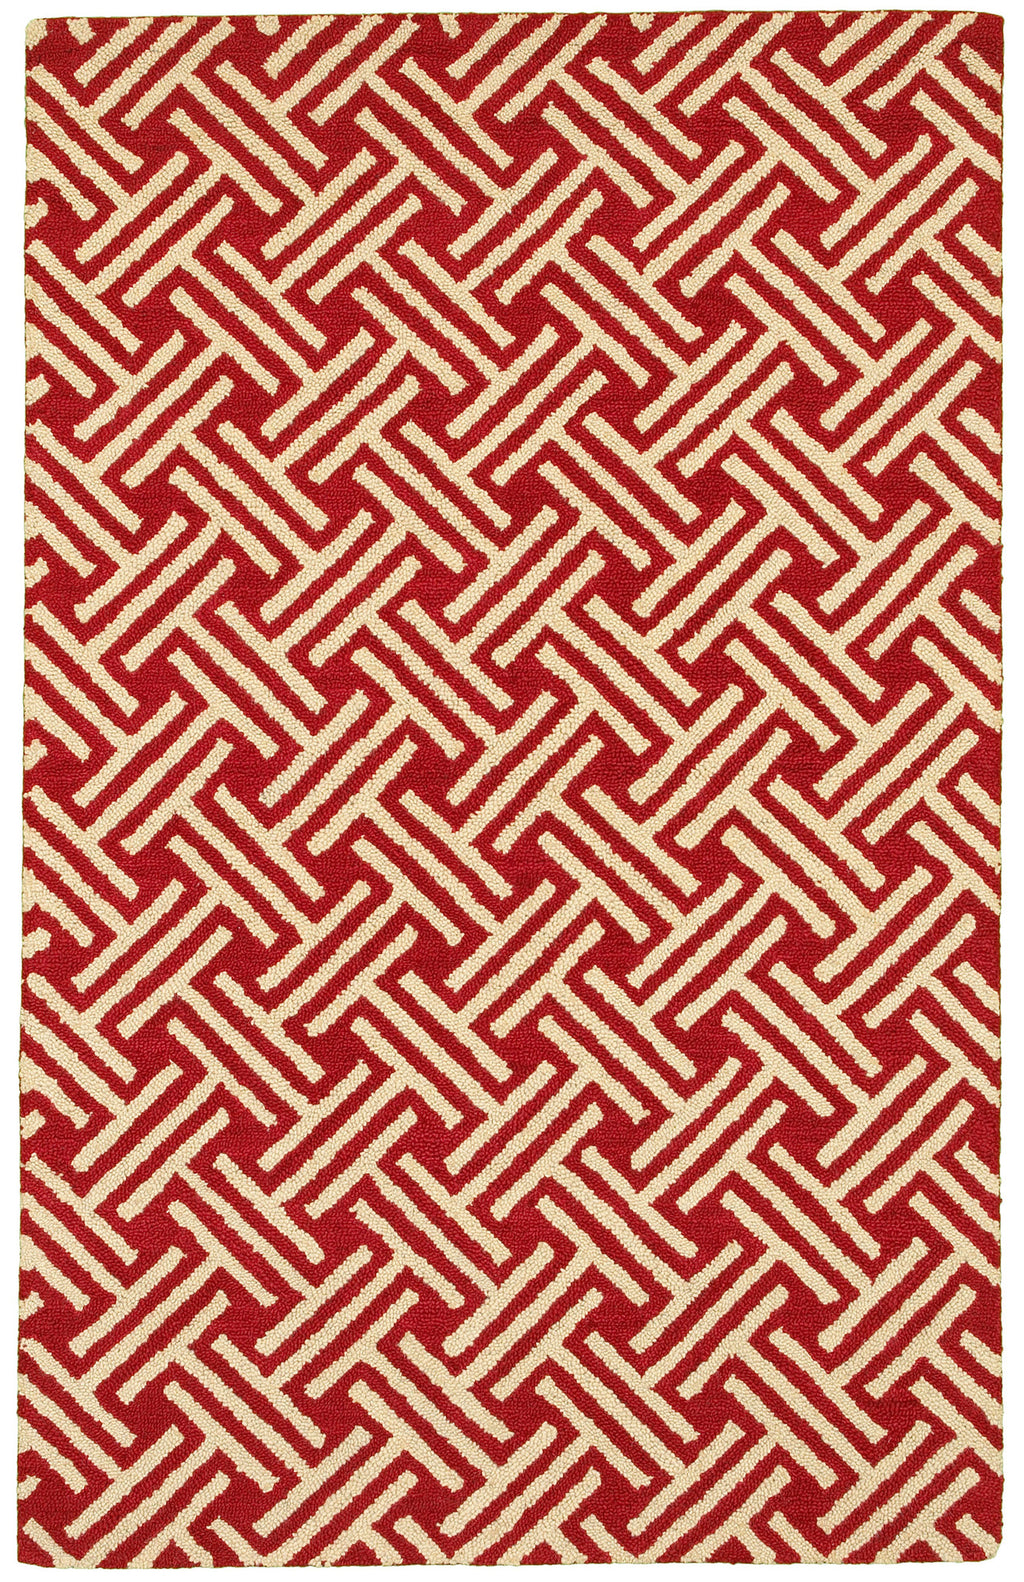 LR Resources Dazzle 54022 Red Hand Hooked Area Rug 5' X 7'9''